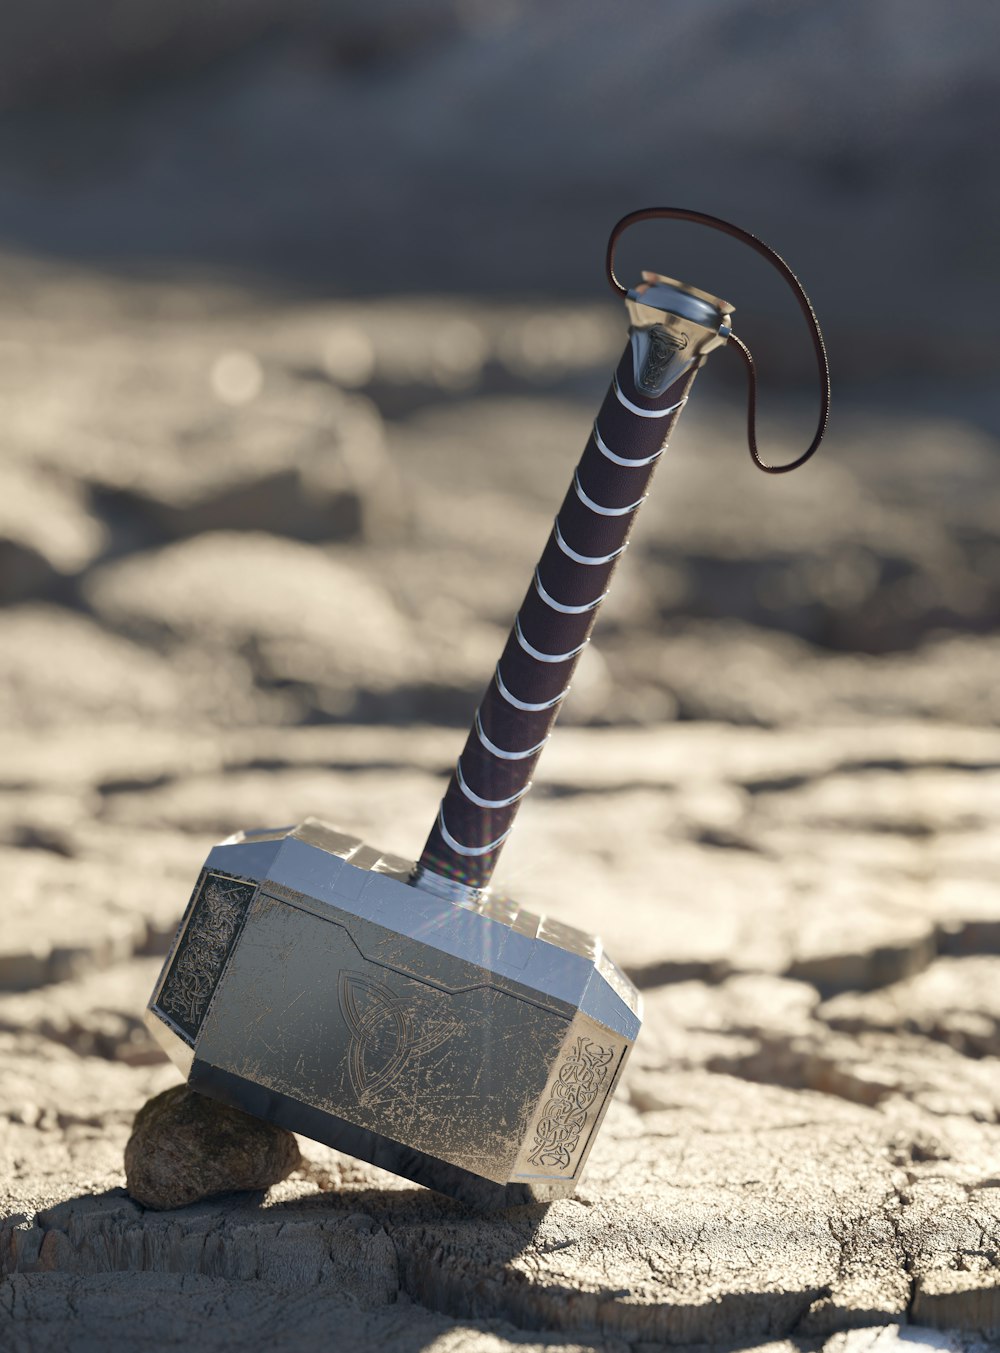 Thor Hammer Pictures | Download Free Images on Unsplash